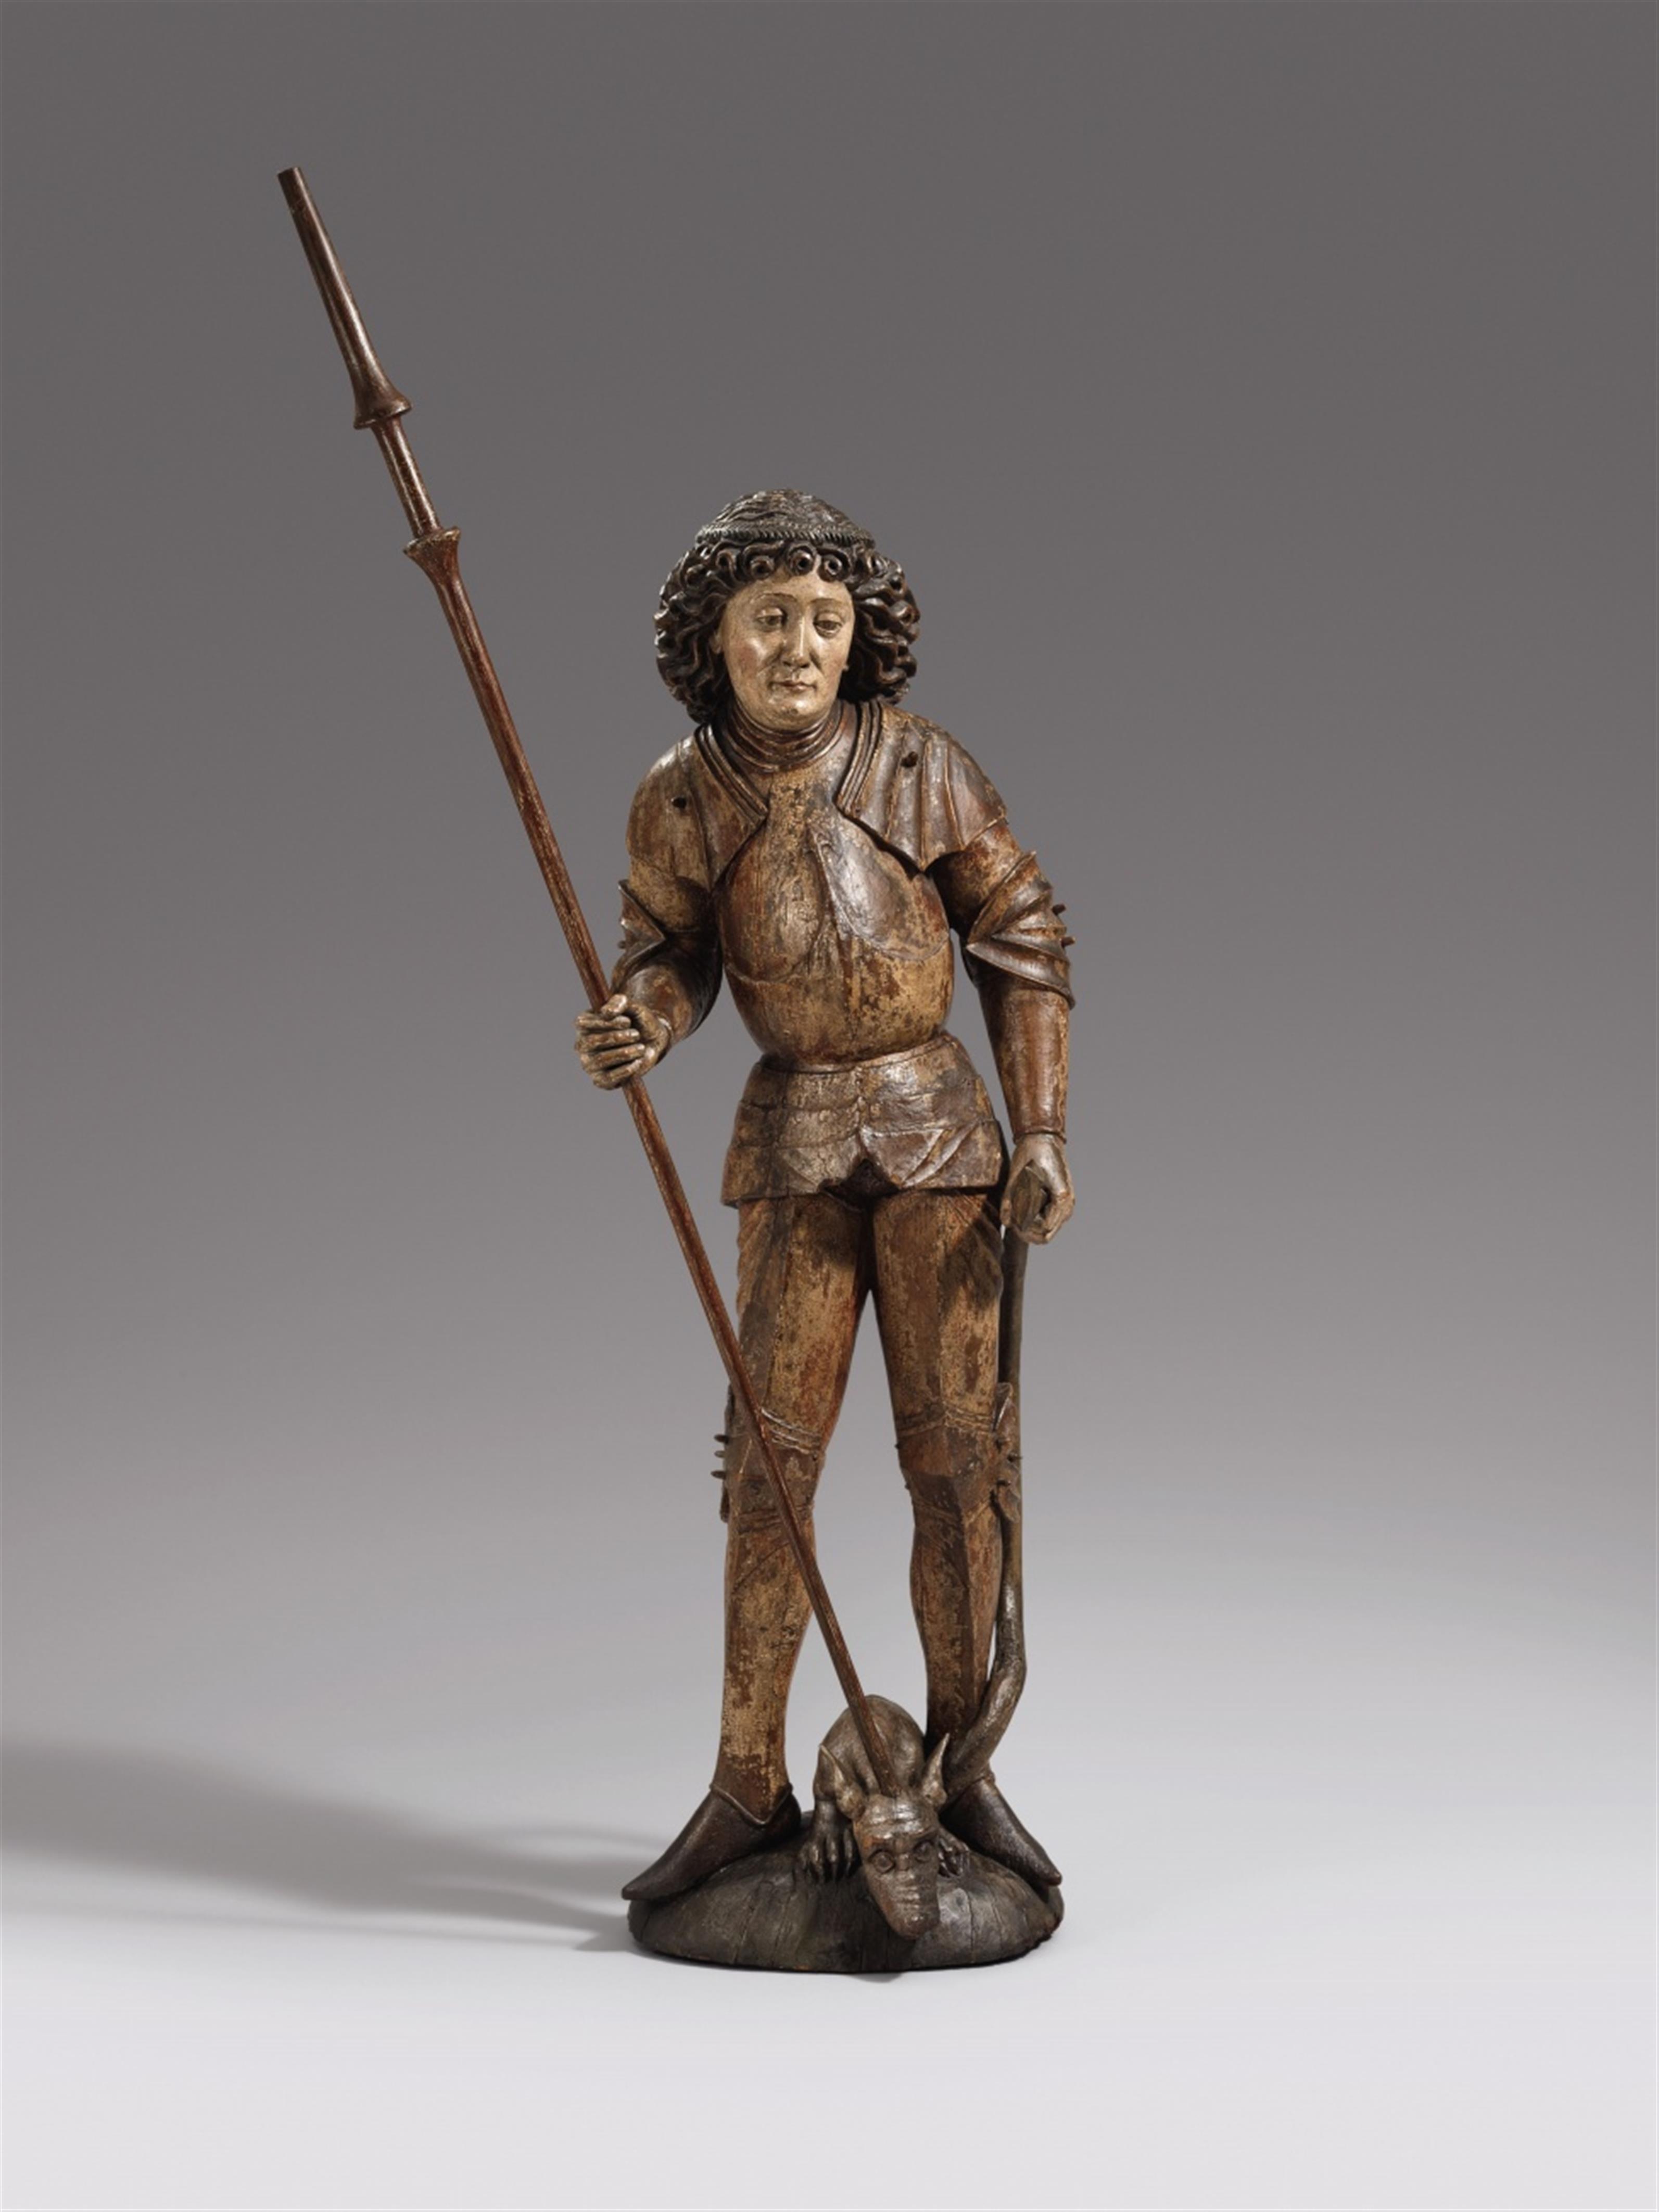 Bavaria or Tyrol 2nd half 15th C. - A carved wooden figure of St. George, Bavarian or Tyrolese, second half 15th century. - image-1